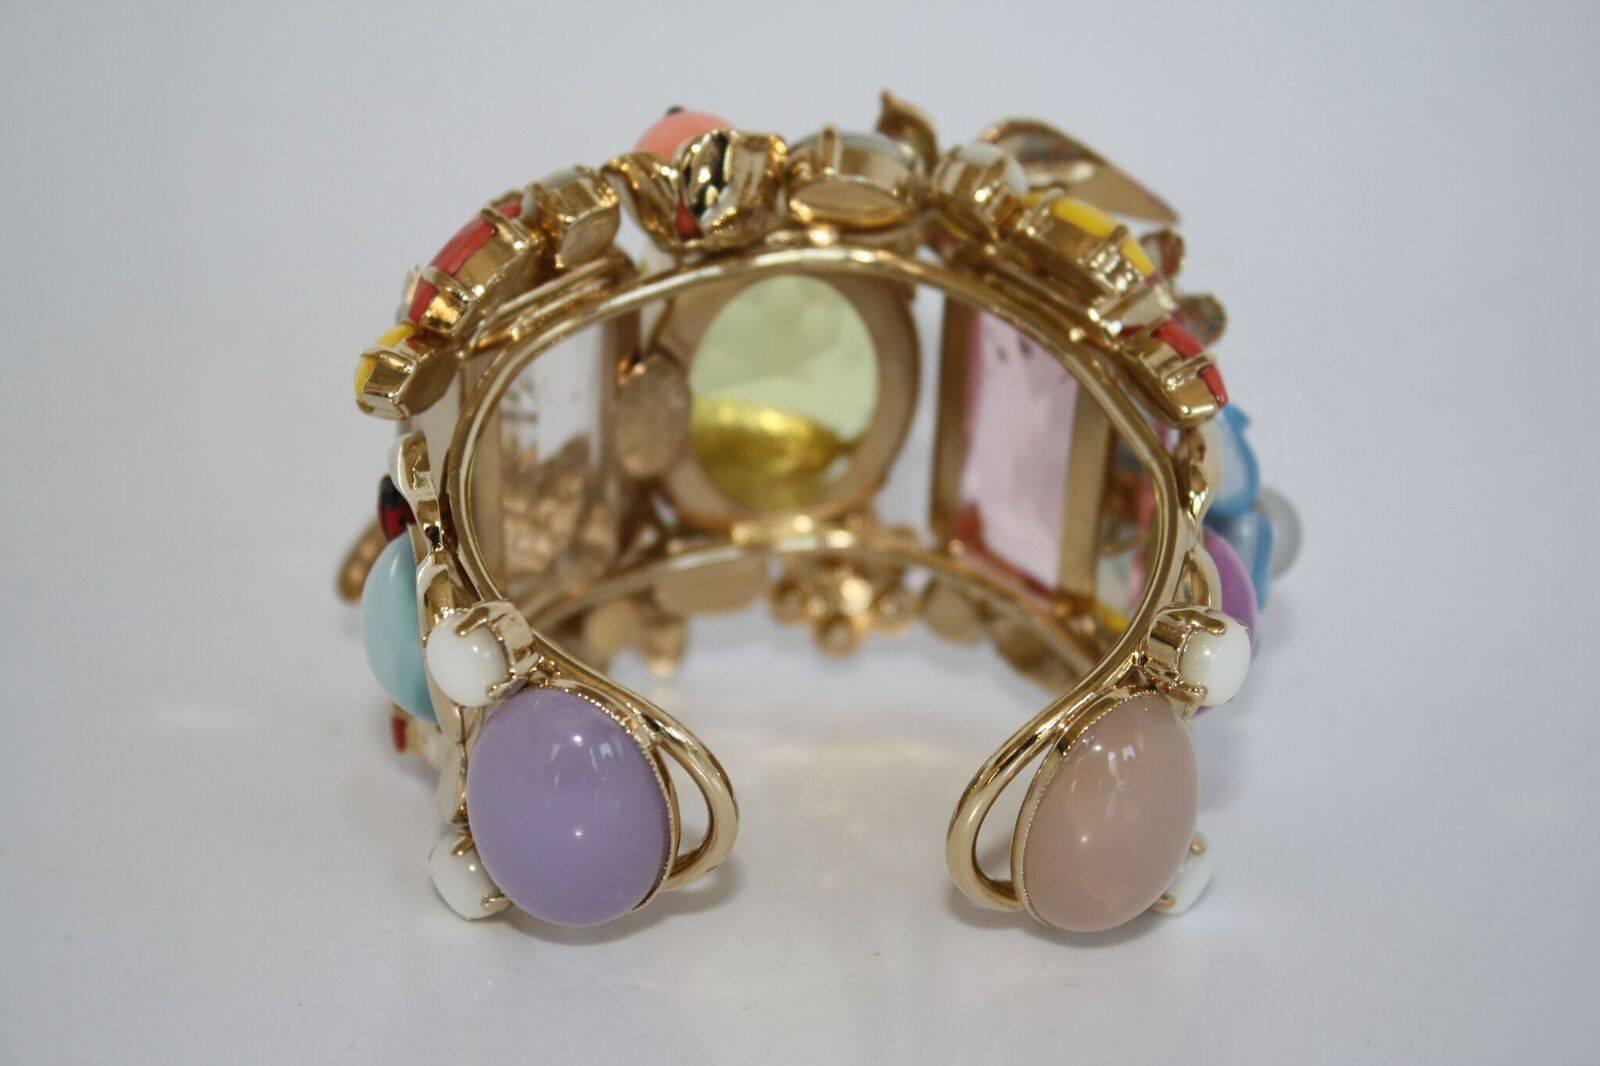 Women's Philippe Ferrandis Crystal and Glass Tropical Cuff Bracelet